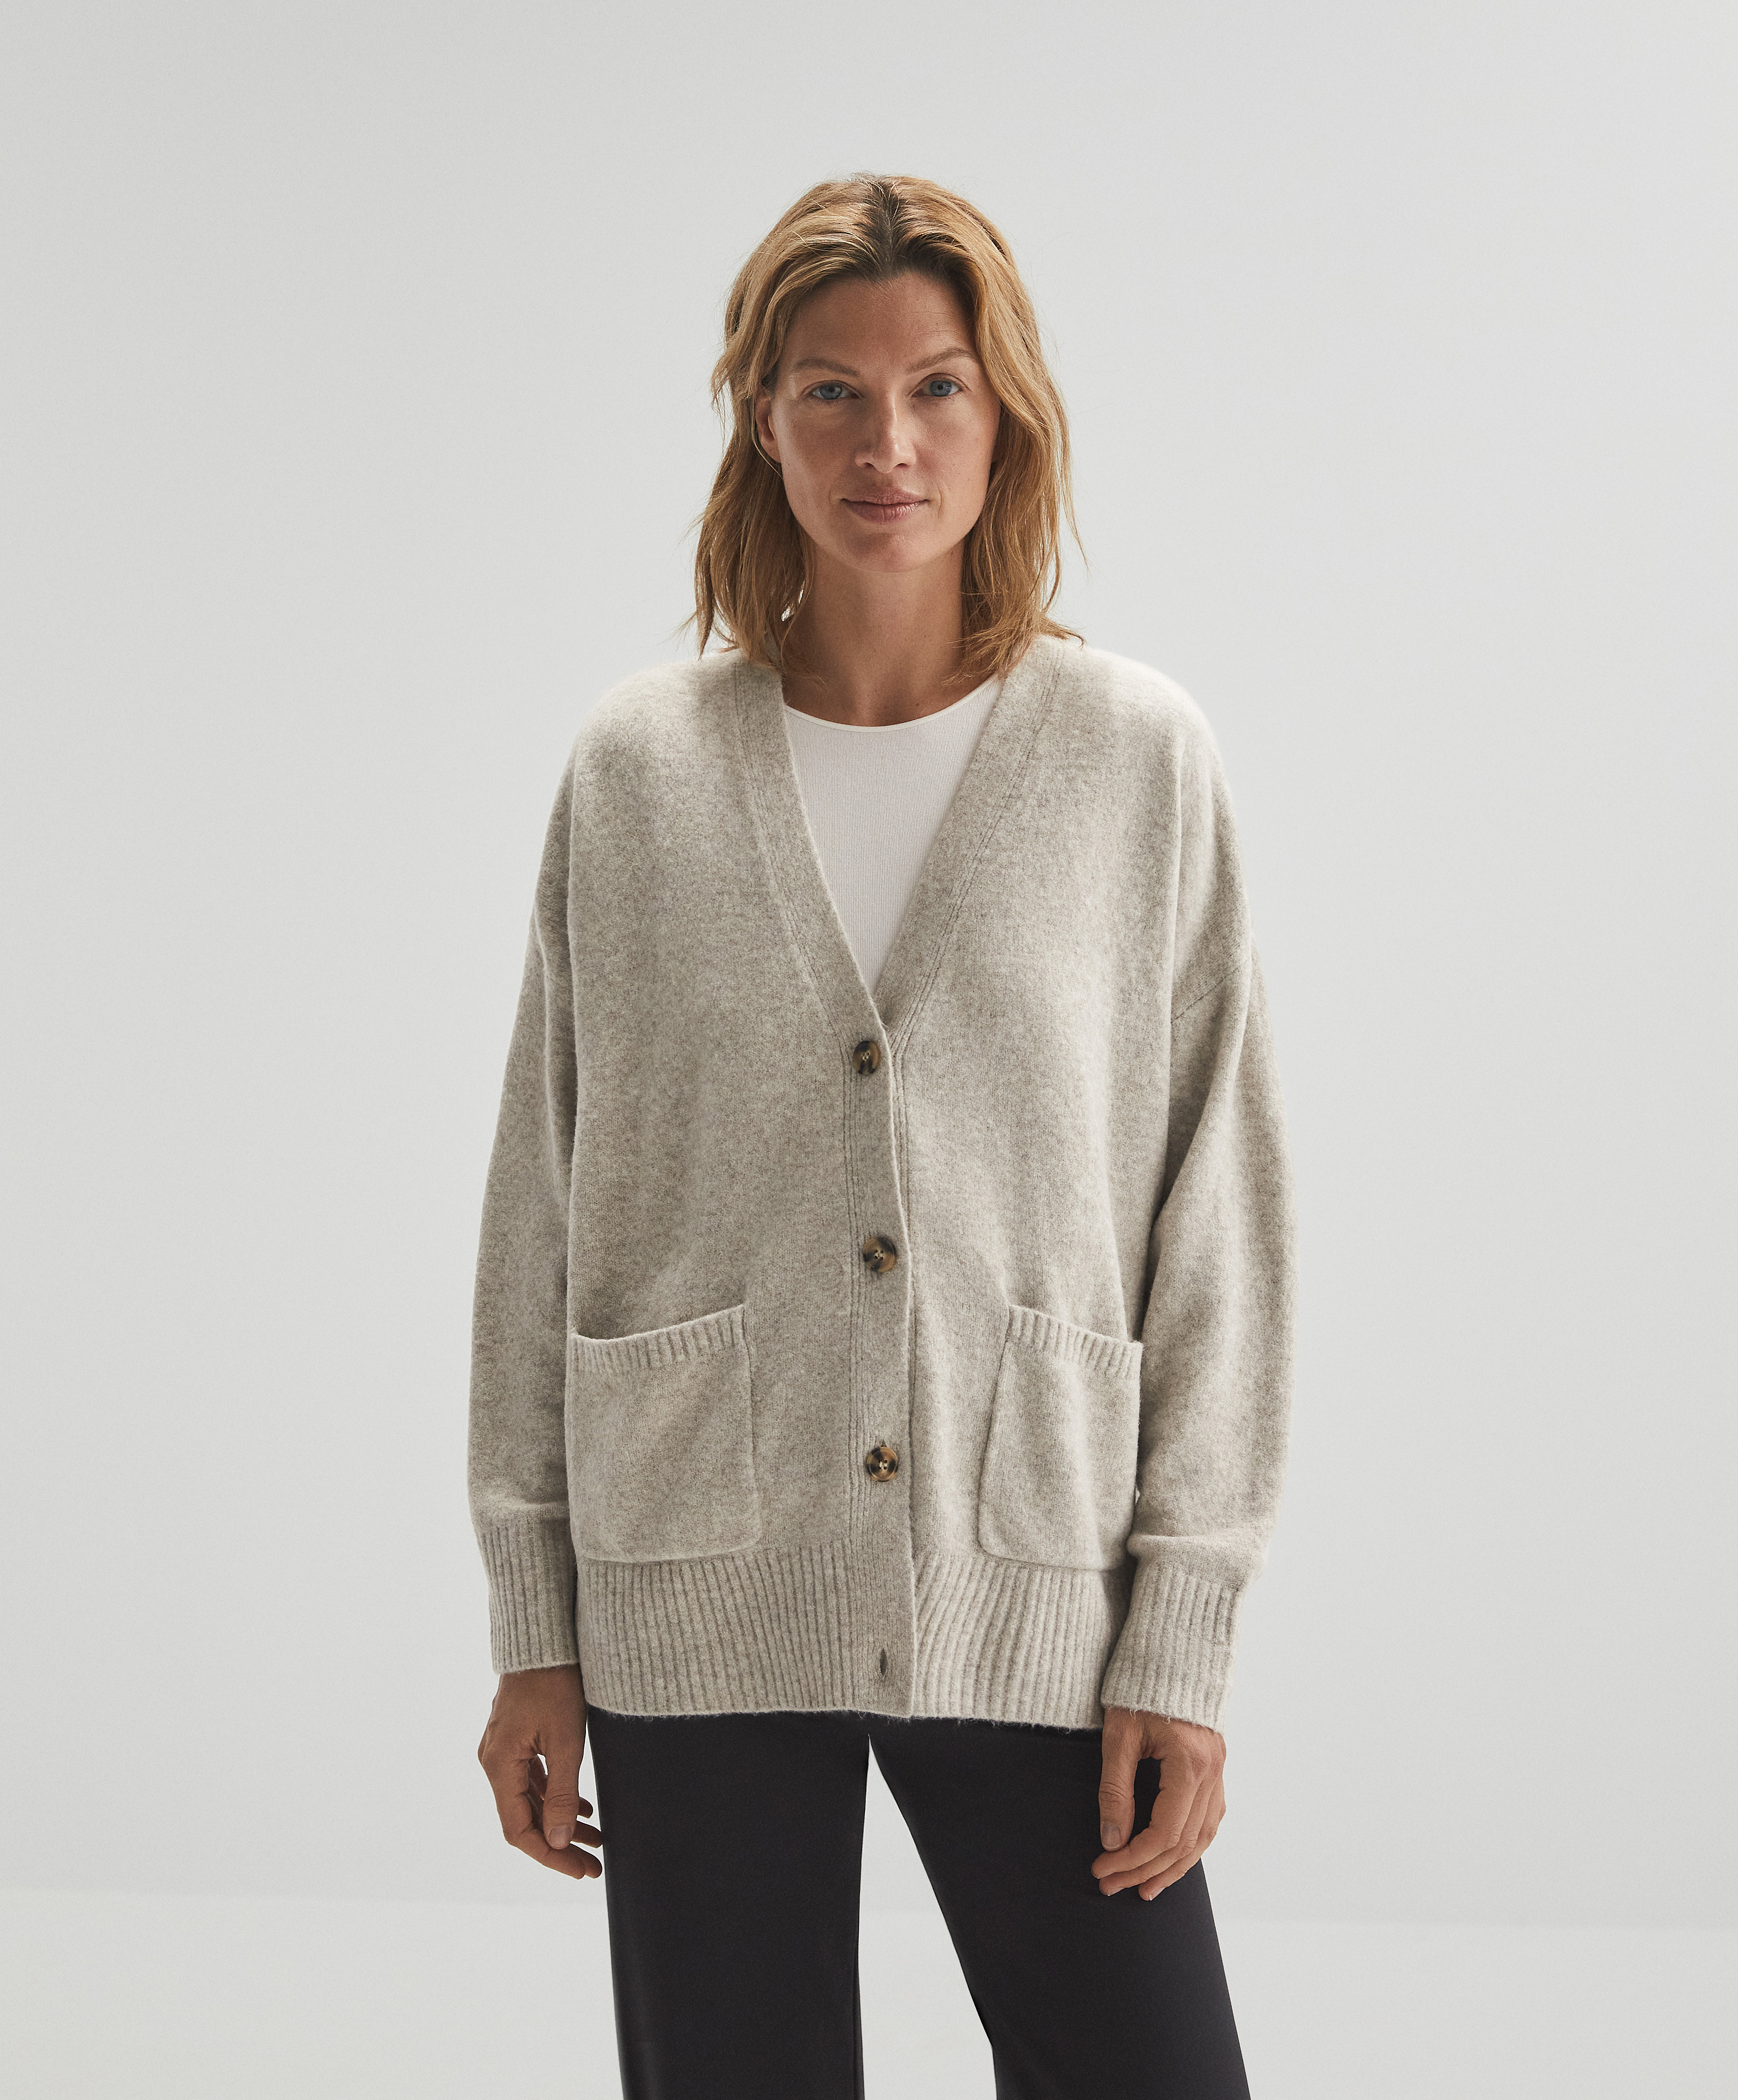 Knit cardigan with pockets